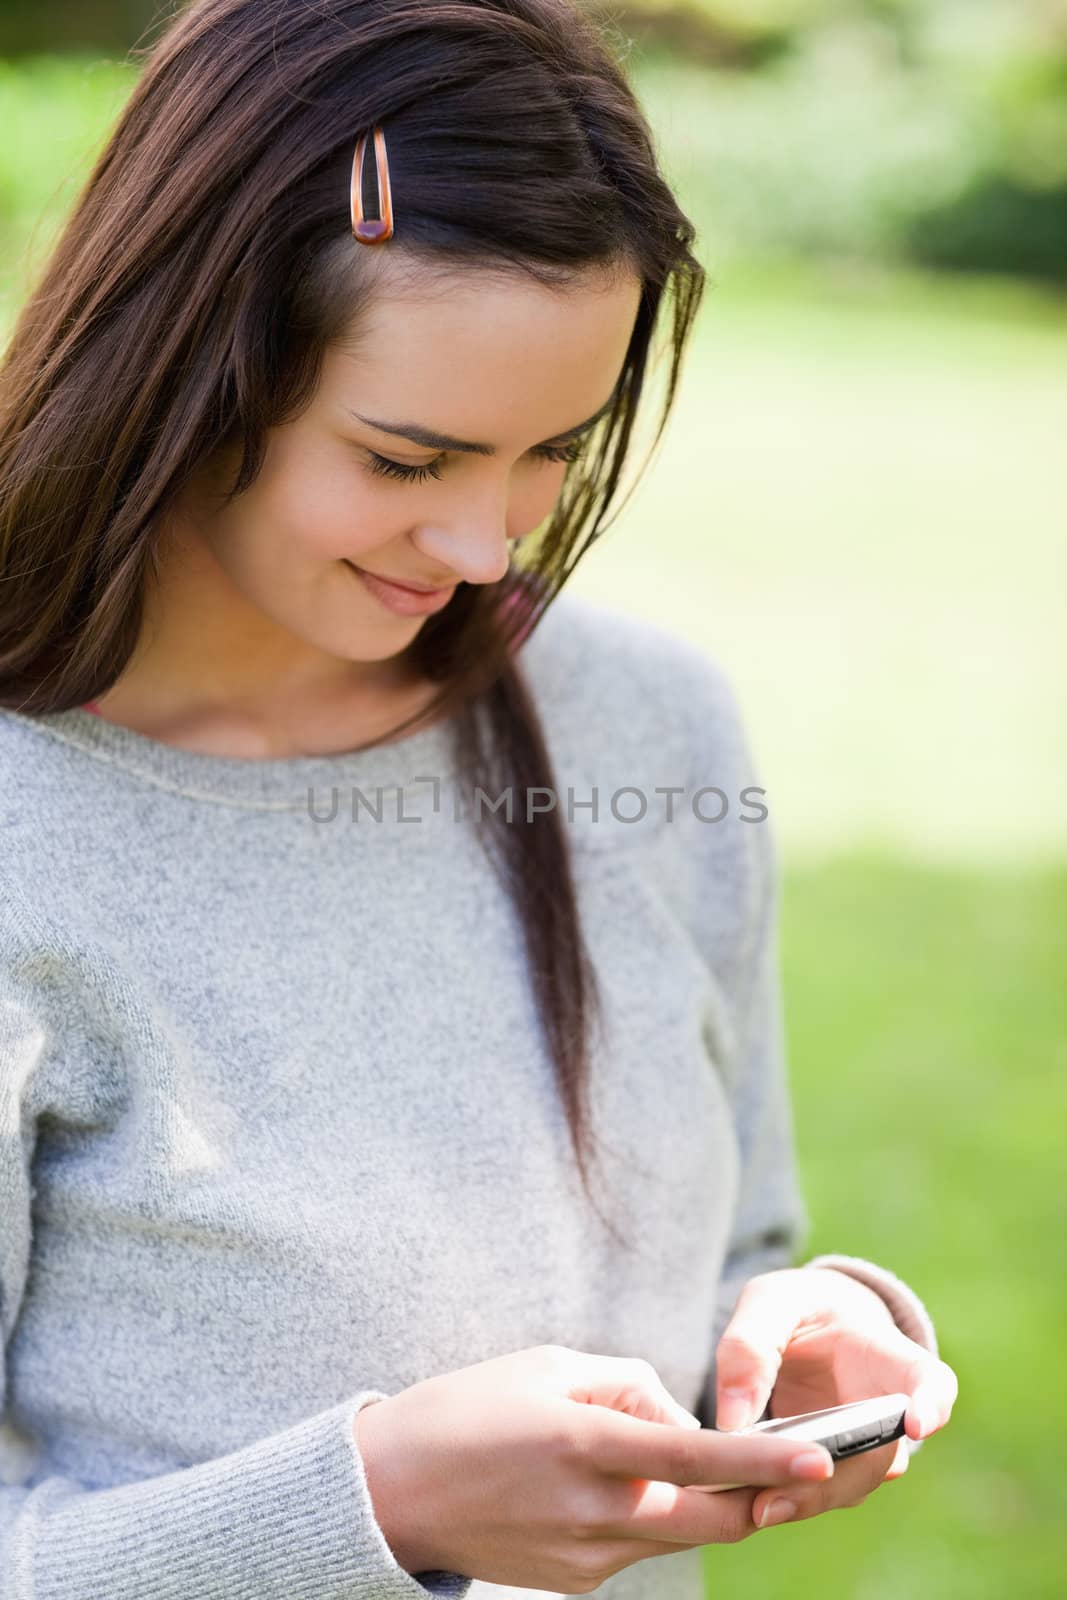 Relaxed young girl sending a text while standing in the countryside